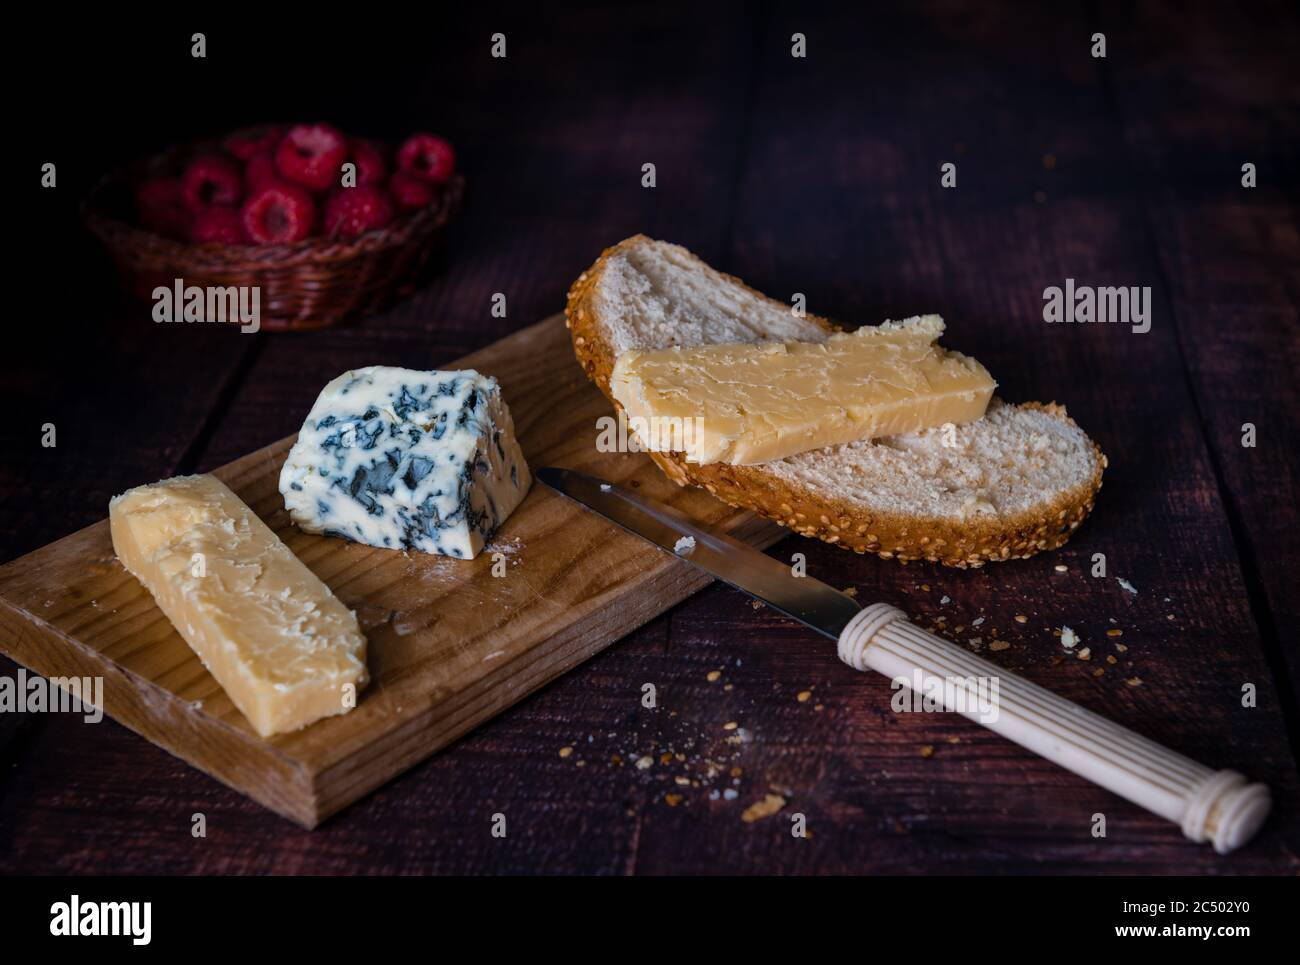 Bread with matured cheddar and soft blue cheese on a wooden board with a basket of raspberries in a dark background. Stock Photo